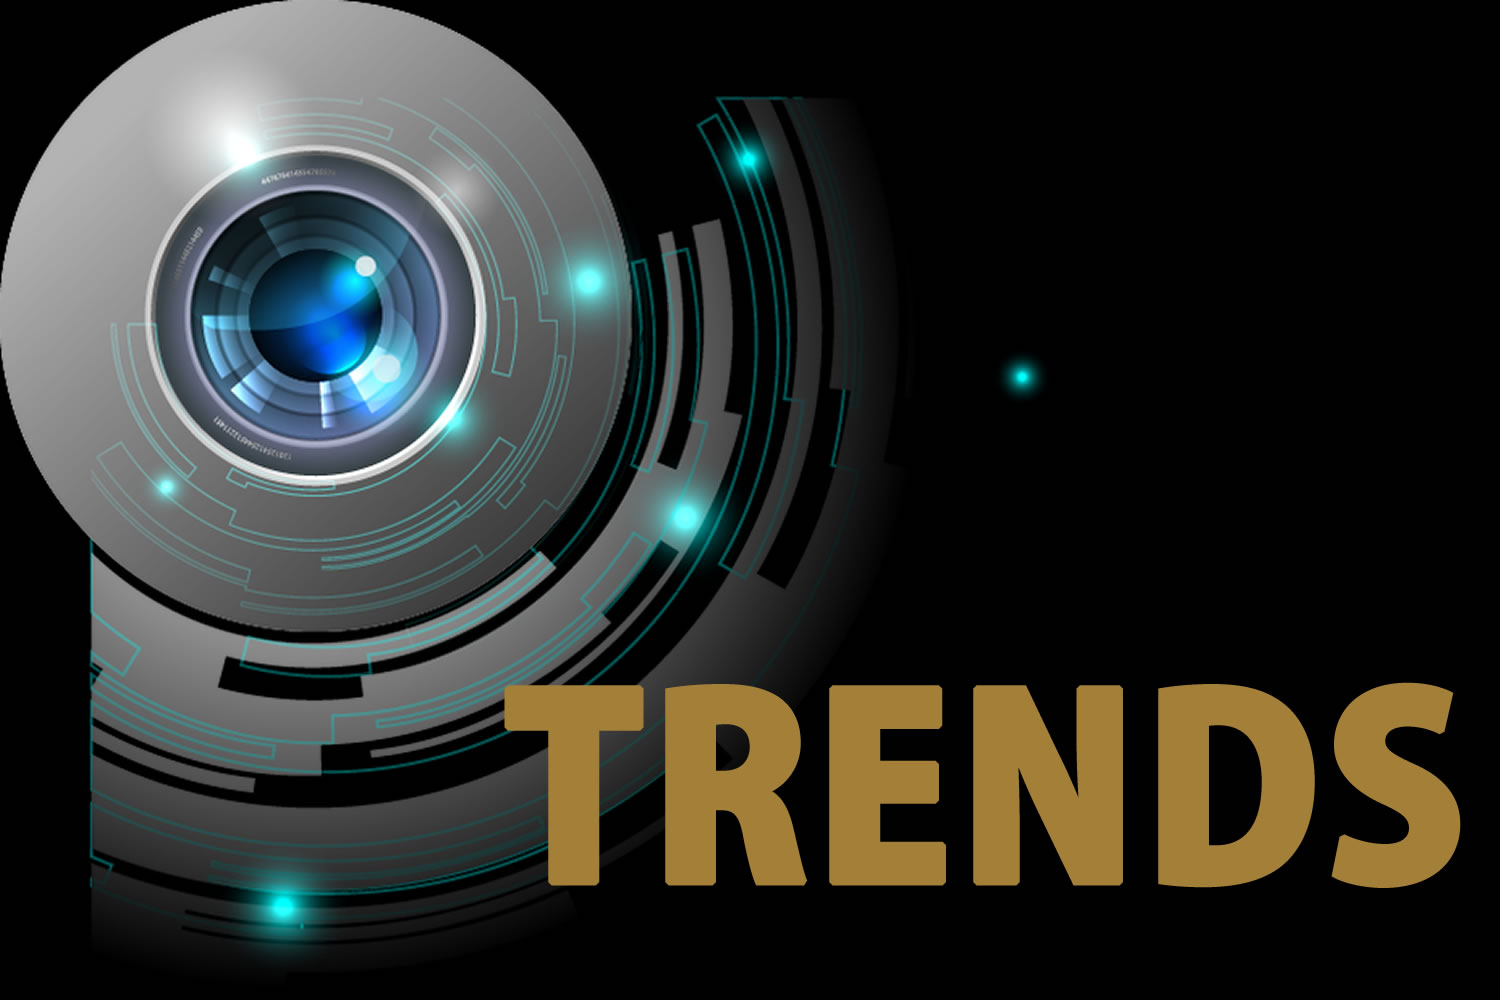 TOP TECHNOLOGY TRENDS TO WATCH: 2014 TO 2016